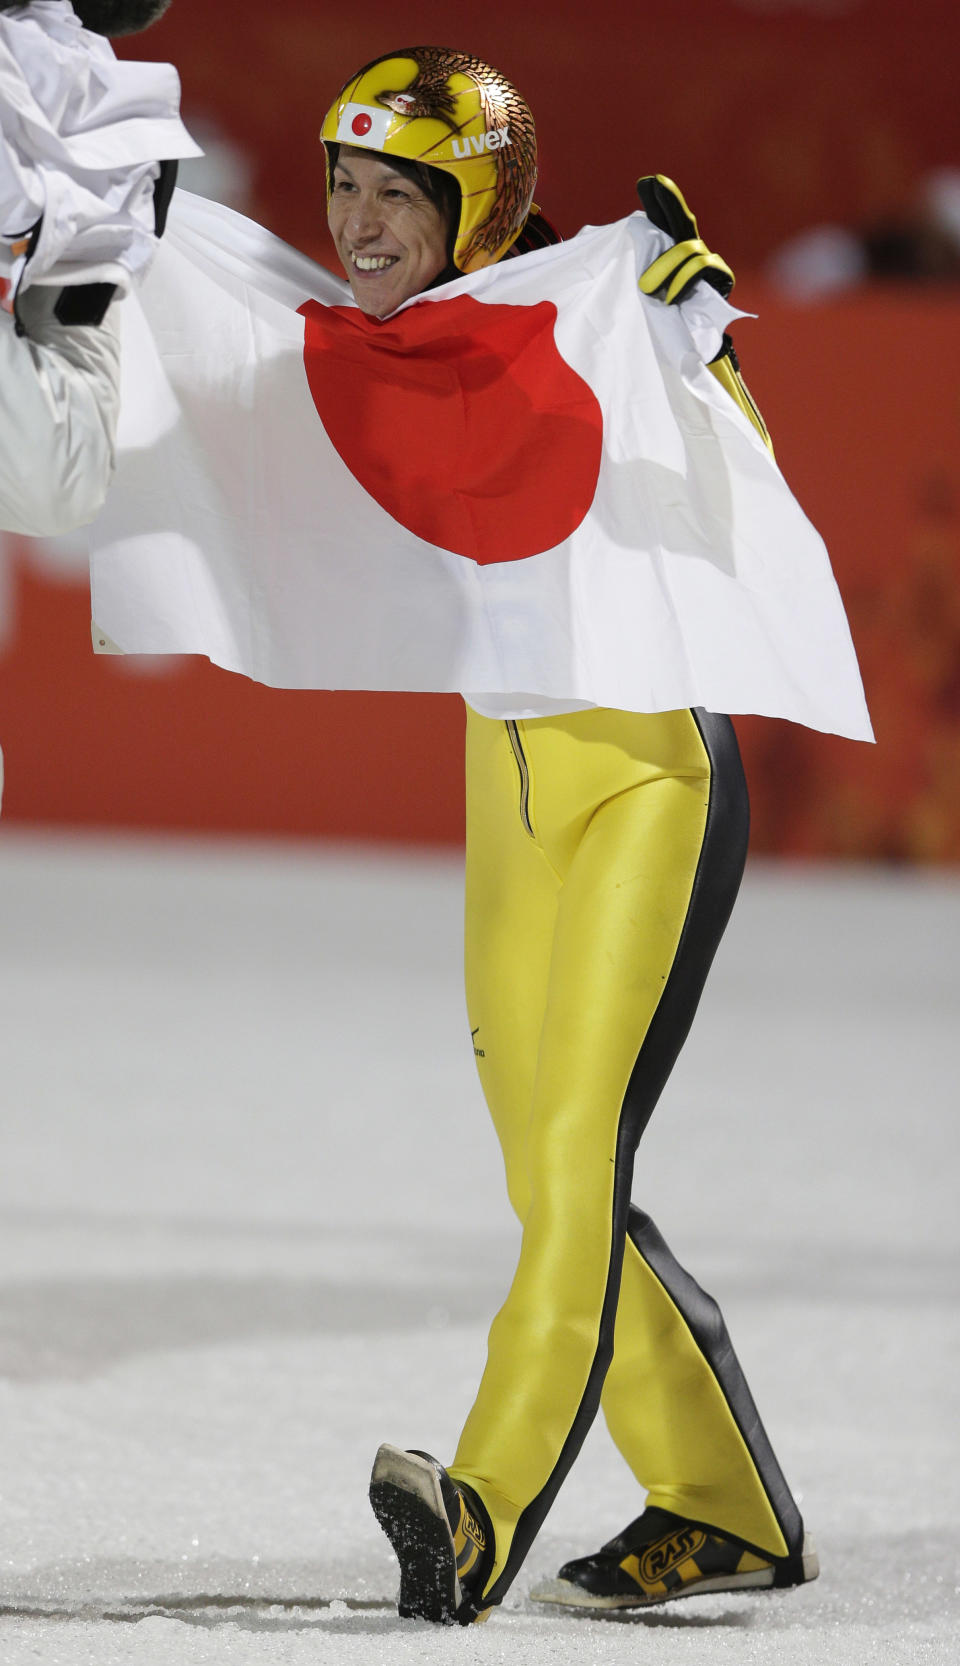 Japan's Noriaki Kasai celebrates with the Japanese flag after winning the silver during the ski jumping large hill final at the 2014 Winter Olympics, Saturday, Feb. 15, 2014, in Krasnaya Polyana, Russia. (AP Photo/Matthias Schrader)